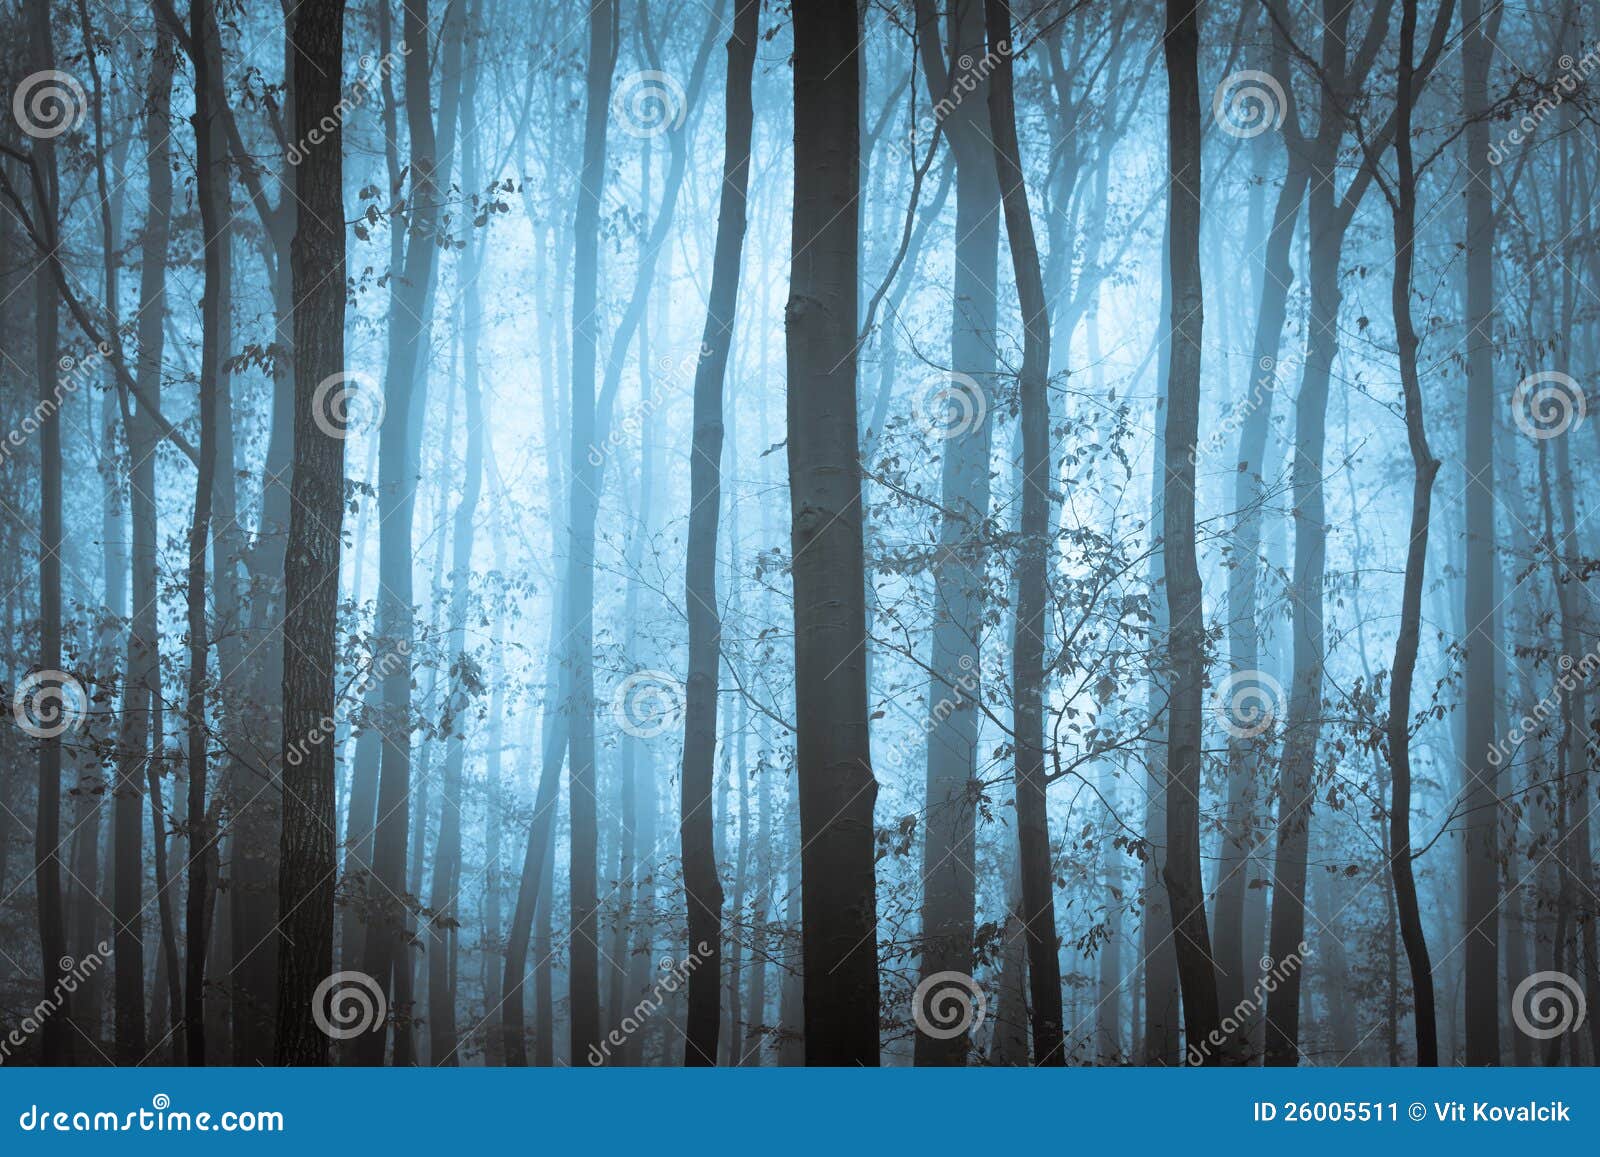 dark blue spooky forrest with trees